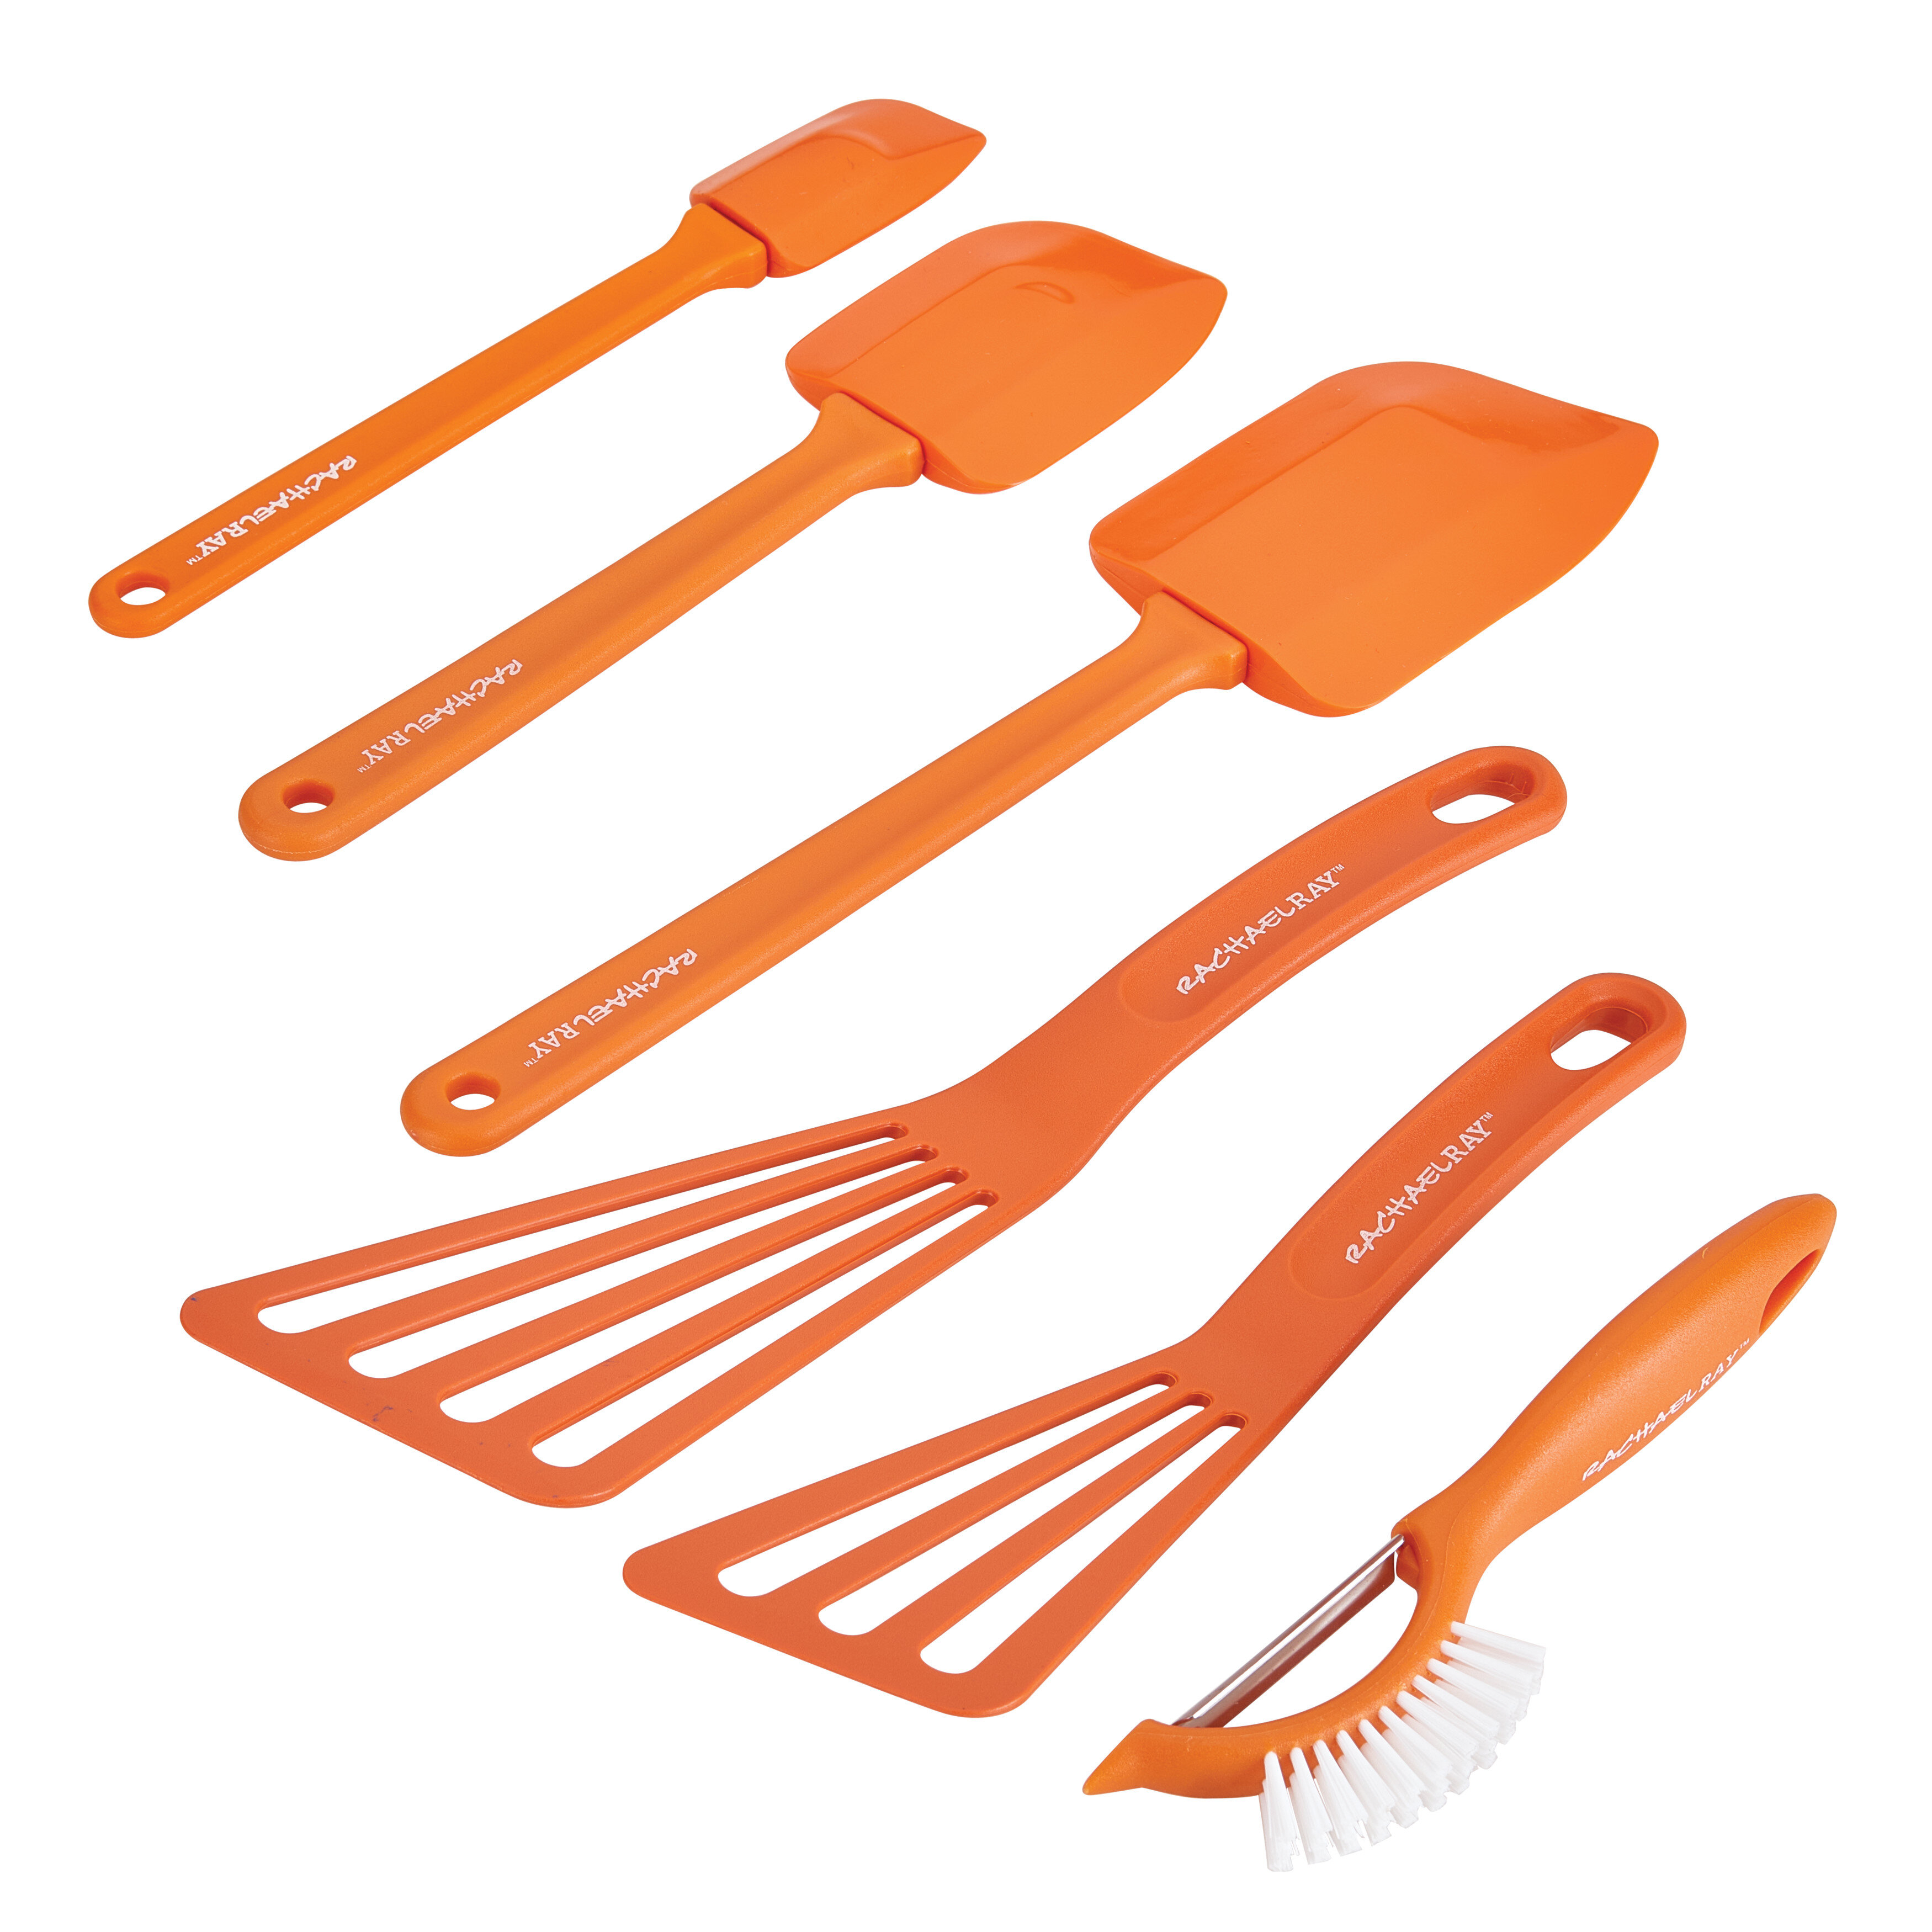 OXO Good Grips 3-Piece Silicone Spatula Set, x 2 sets (Total of 6 Spatulas)